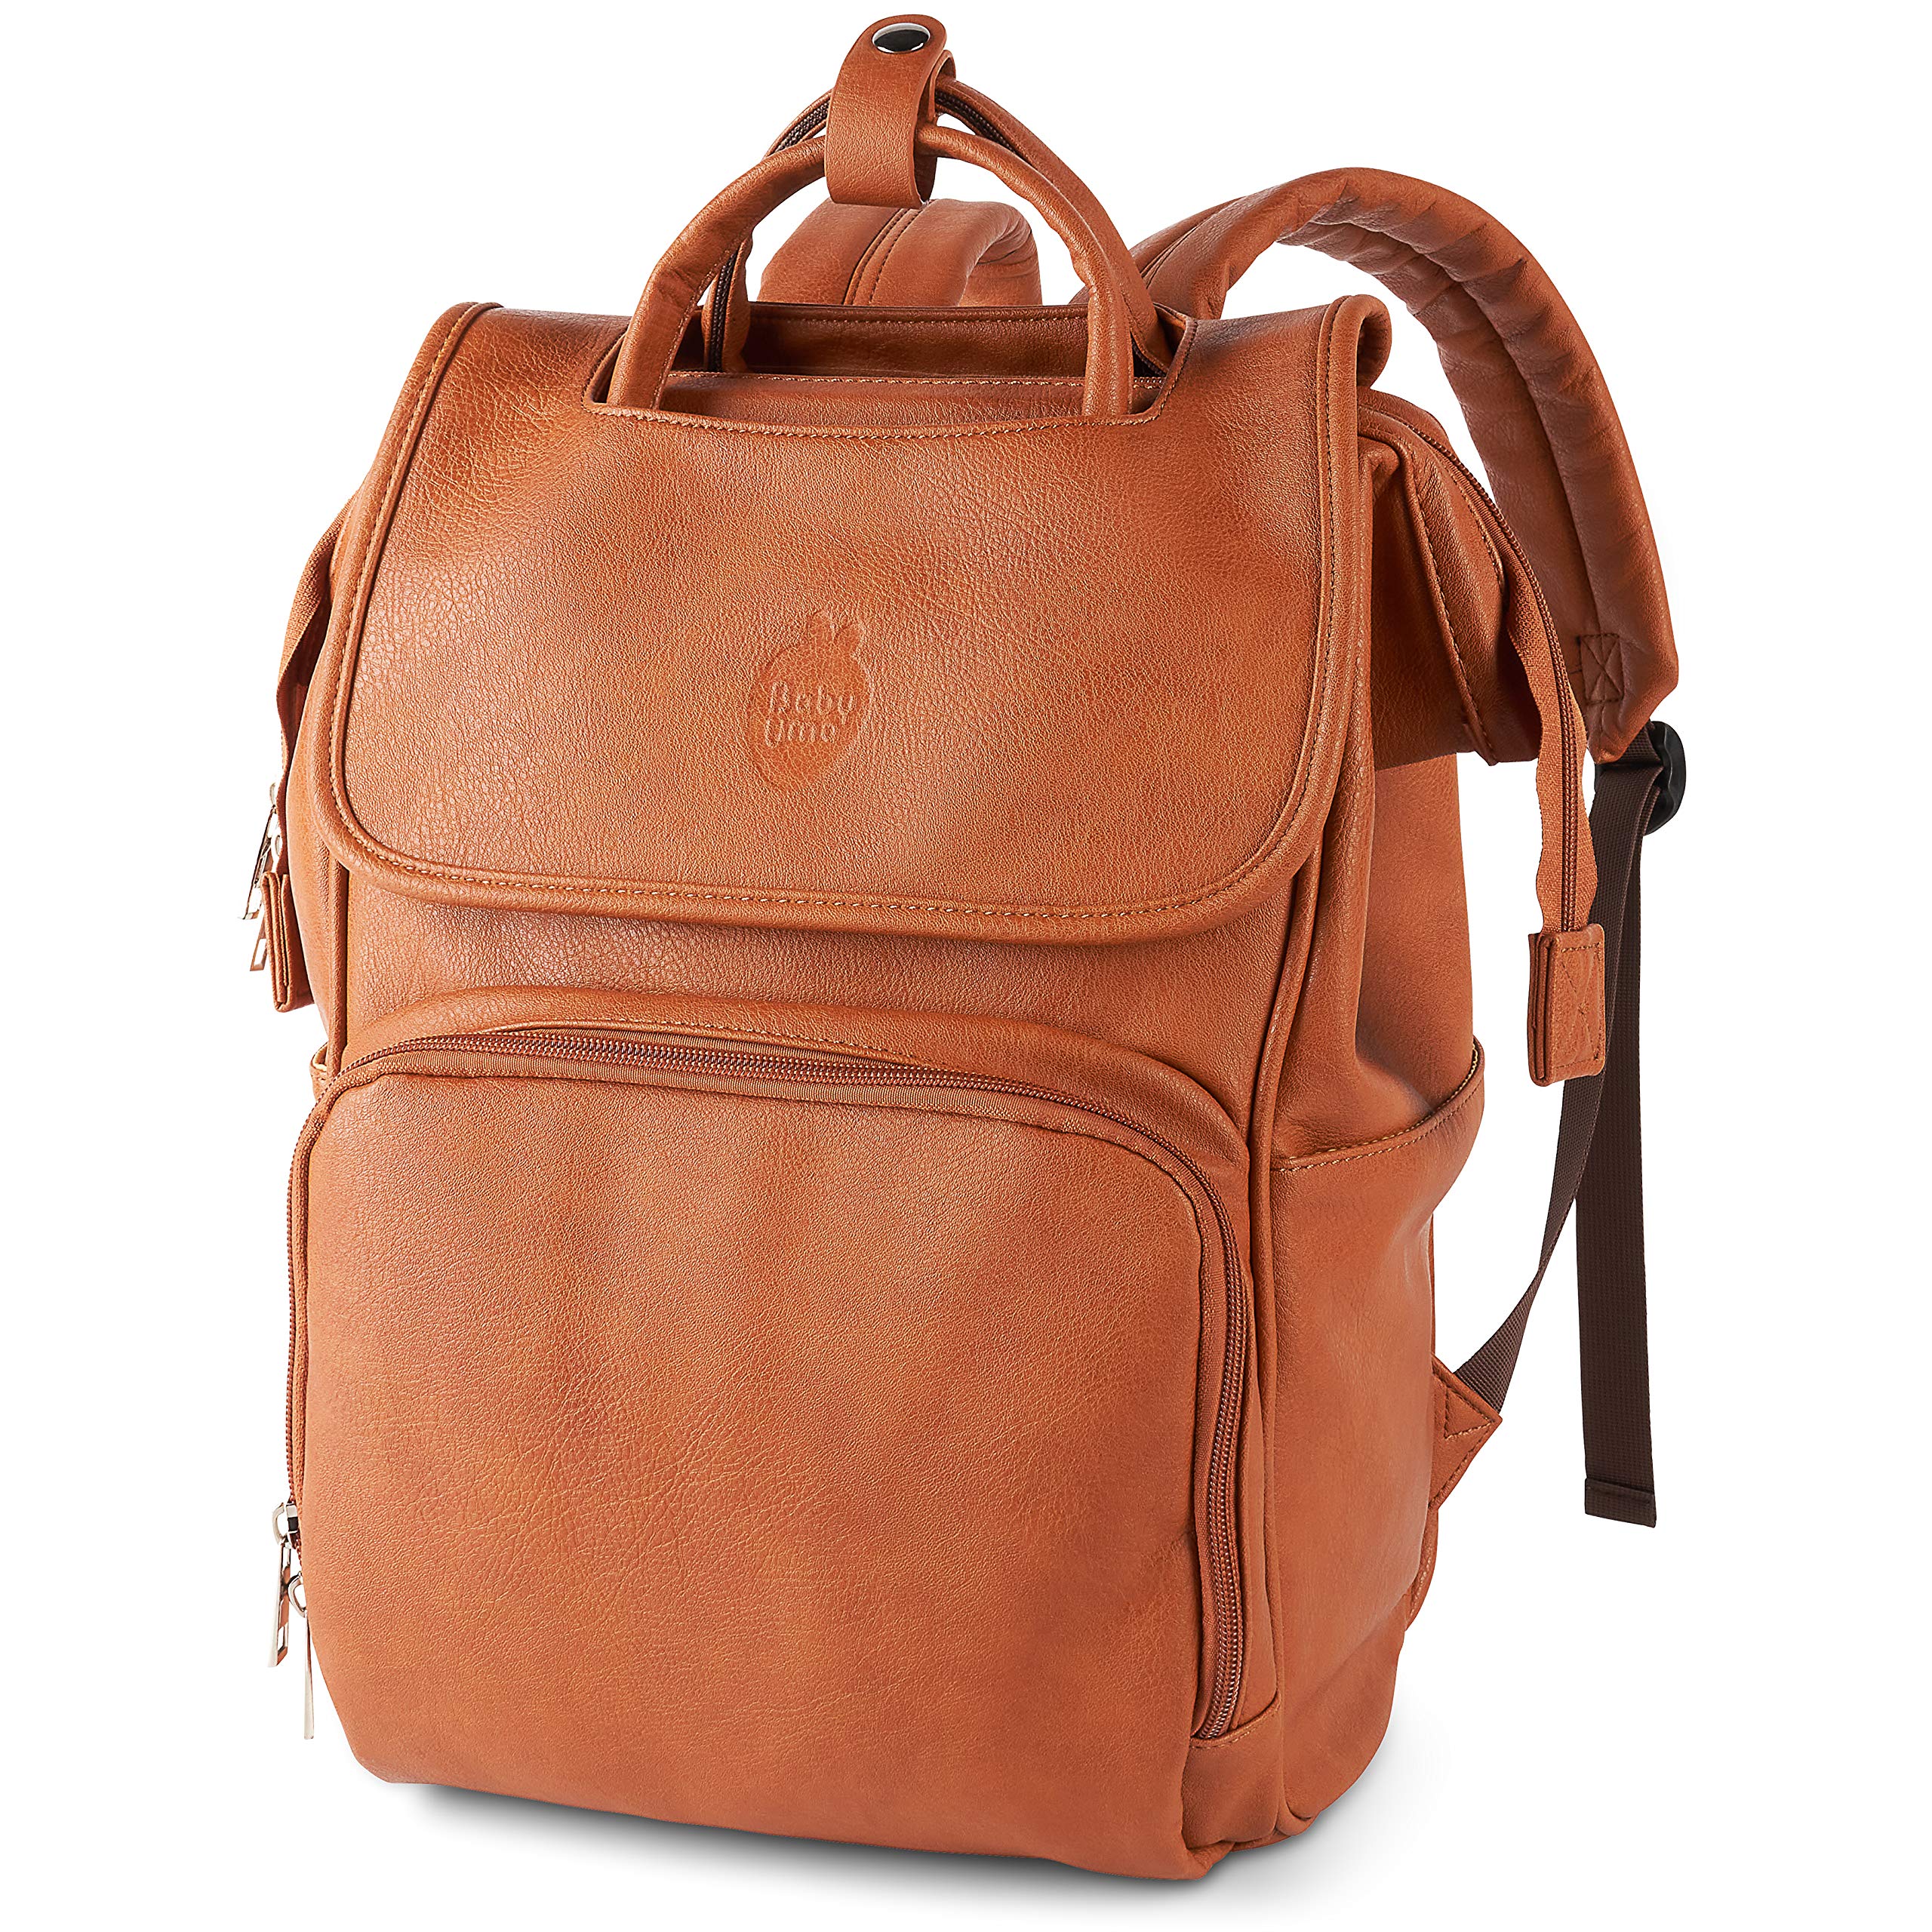 Chic Vegan Leather Change Bag - Unisex Baby Changing Backpack, A Real Mary Poppins Bag with Compartments Galore